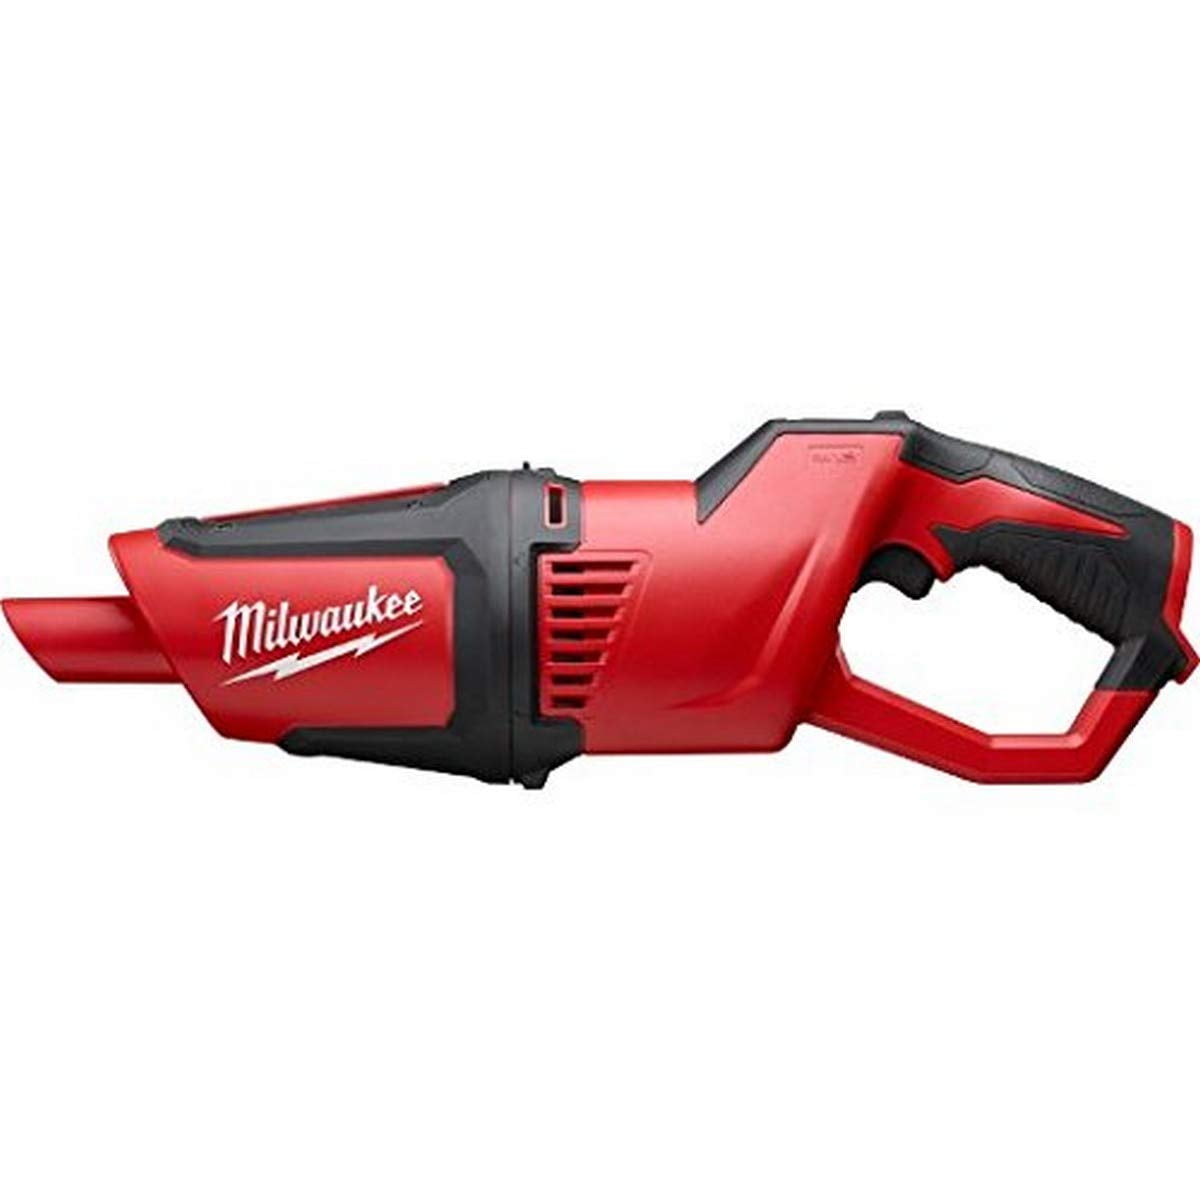 Milwaukee 0850-20 M12 12-Volt Lithium-Ion Cordless Compact Vacuum (Tool-Only) 